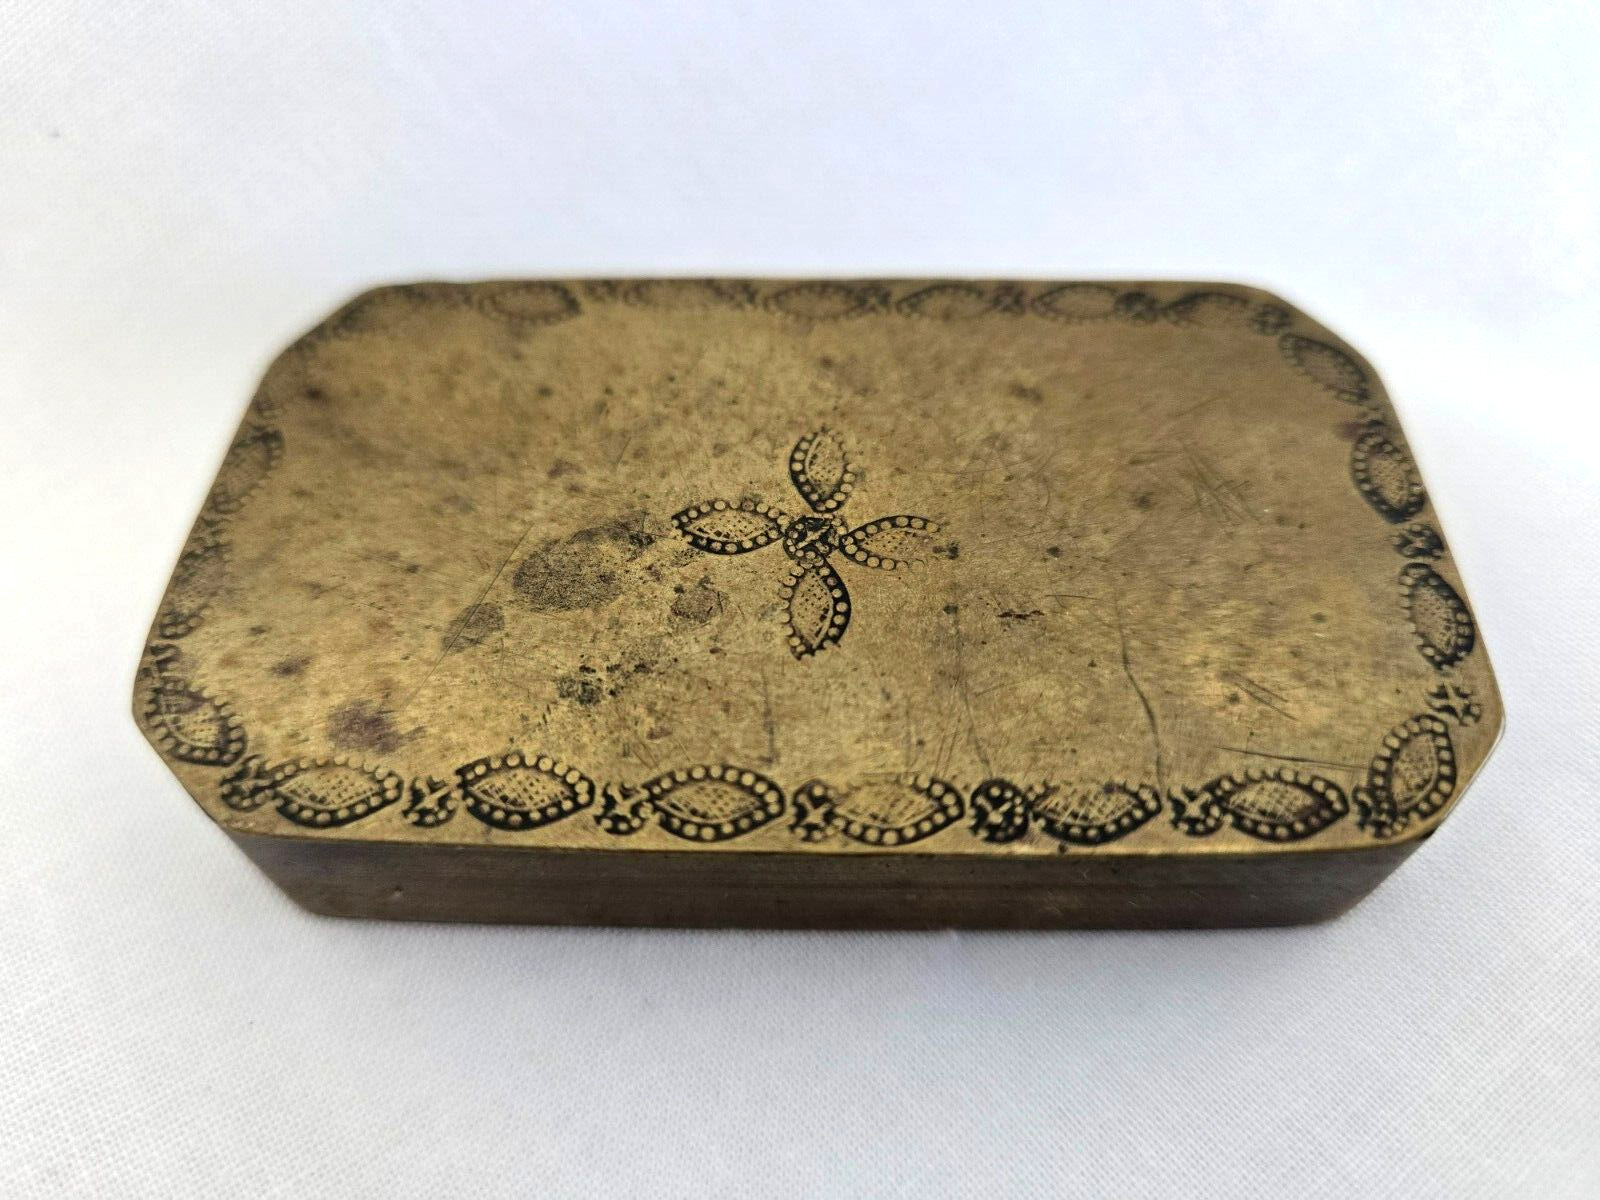 ANTIQUE,18th CENTURY,1700's,BRASS,SNUFF,TOBACCO BOX, WONDERFULLY MADE,ETCHED